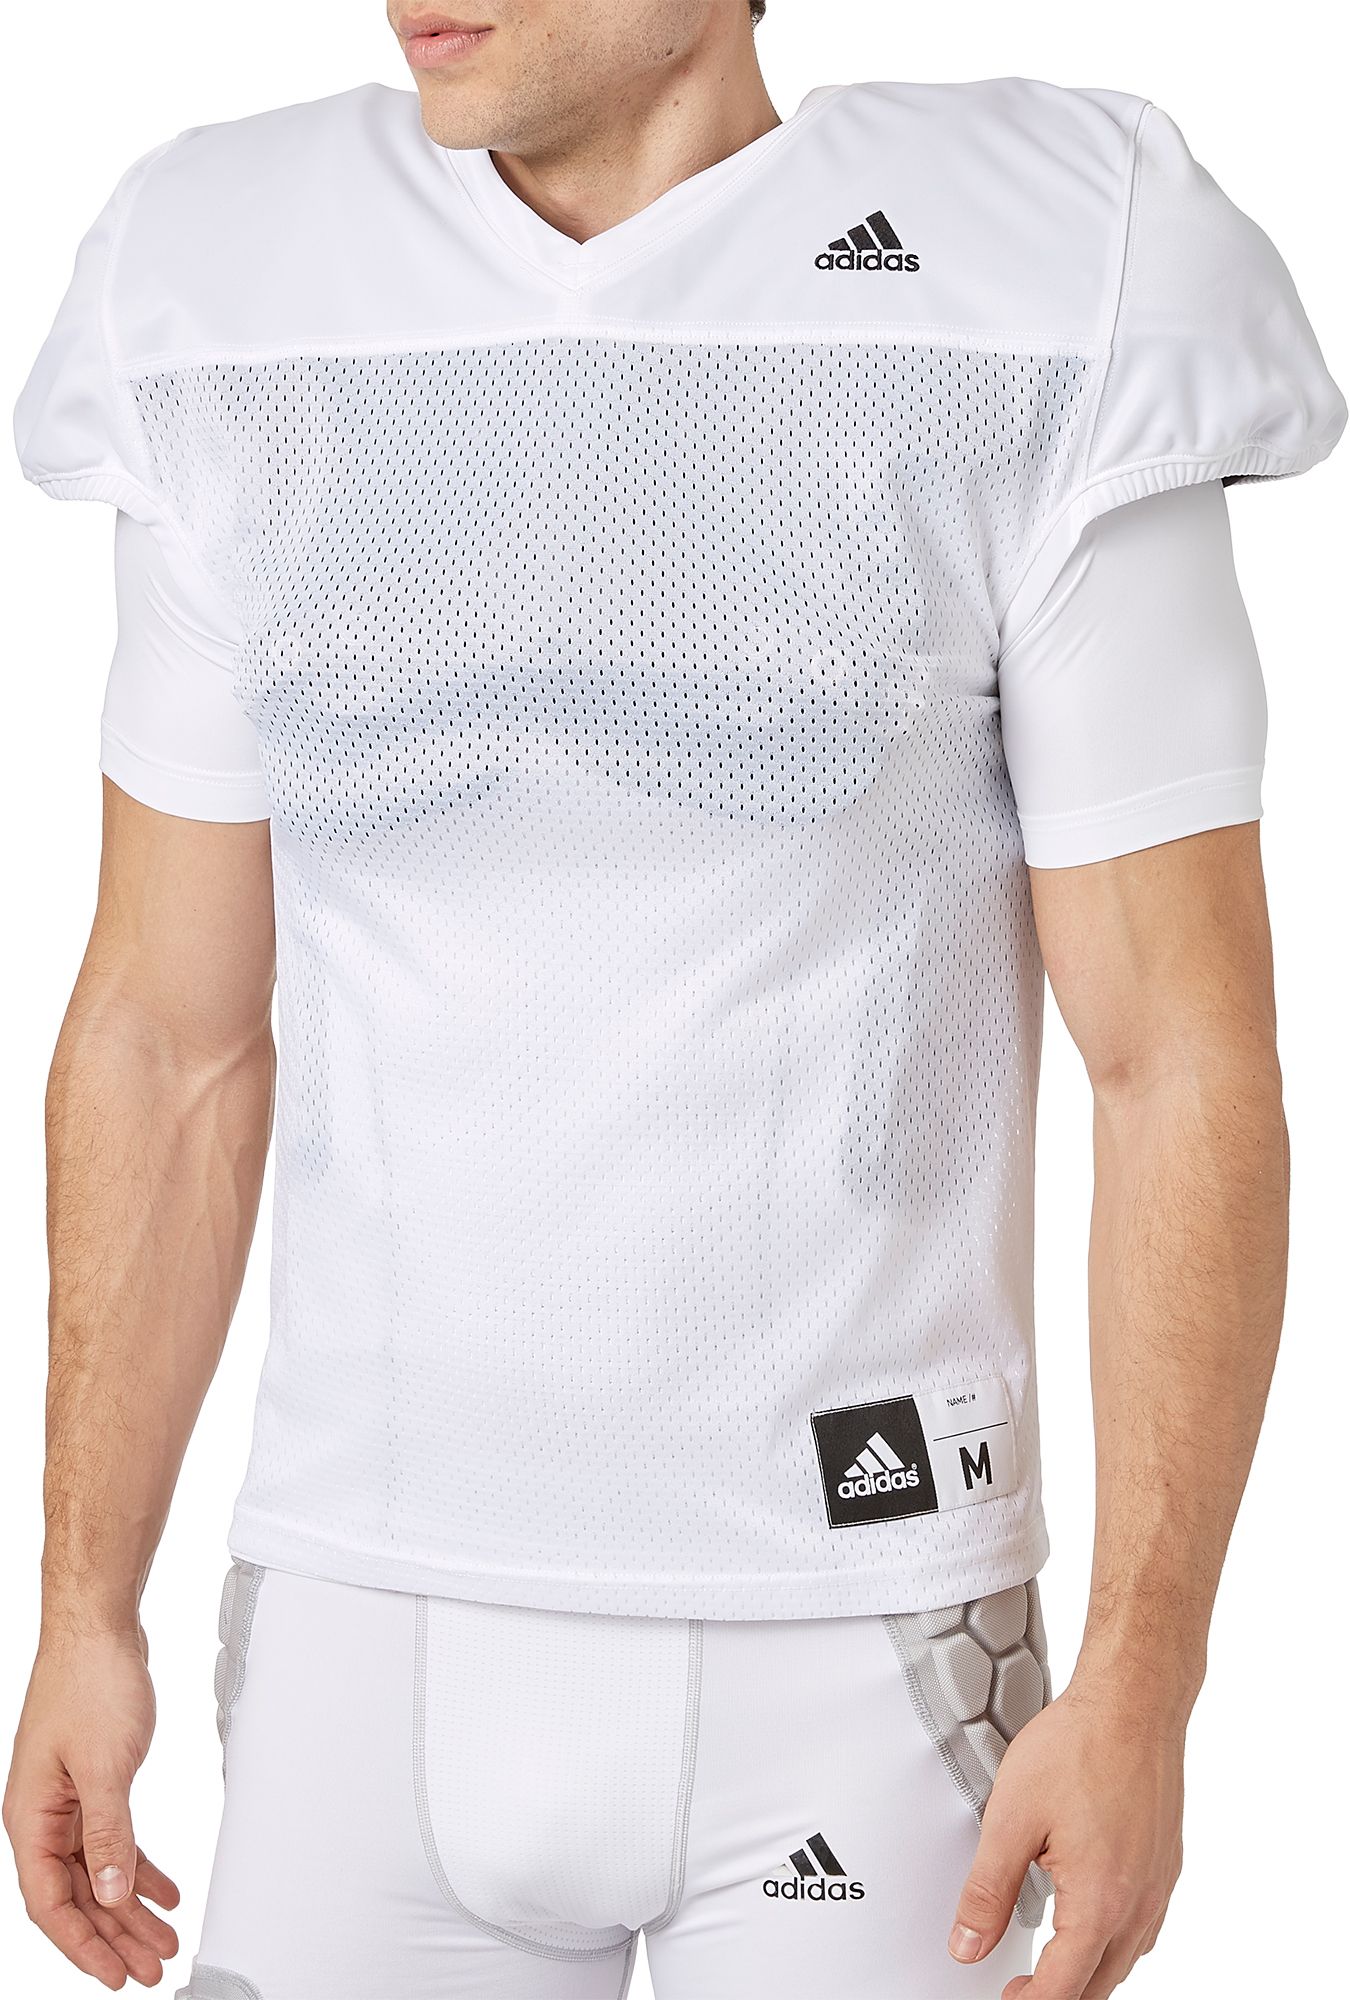 Rival Athletic Company Youth Unisex White Football Practice Jersey New in Pkg 